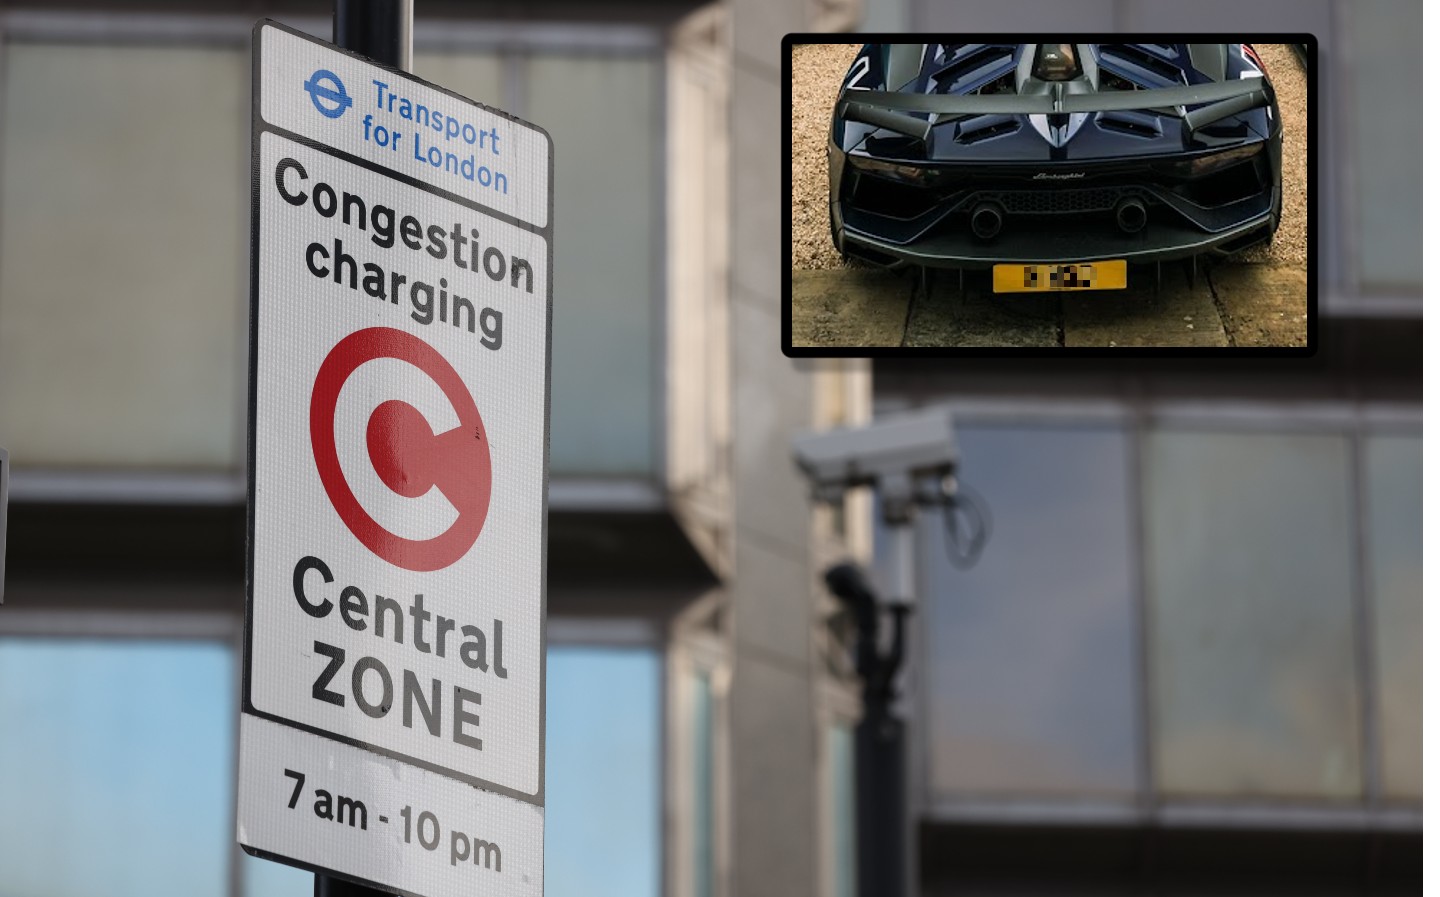 Lamborghini driver baffled after being charged 15 times for entering London Congestion Charge zone, despite images proving it wasn’t his car